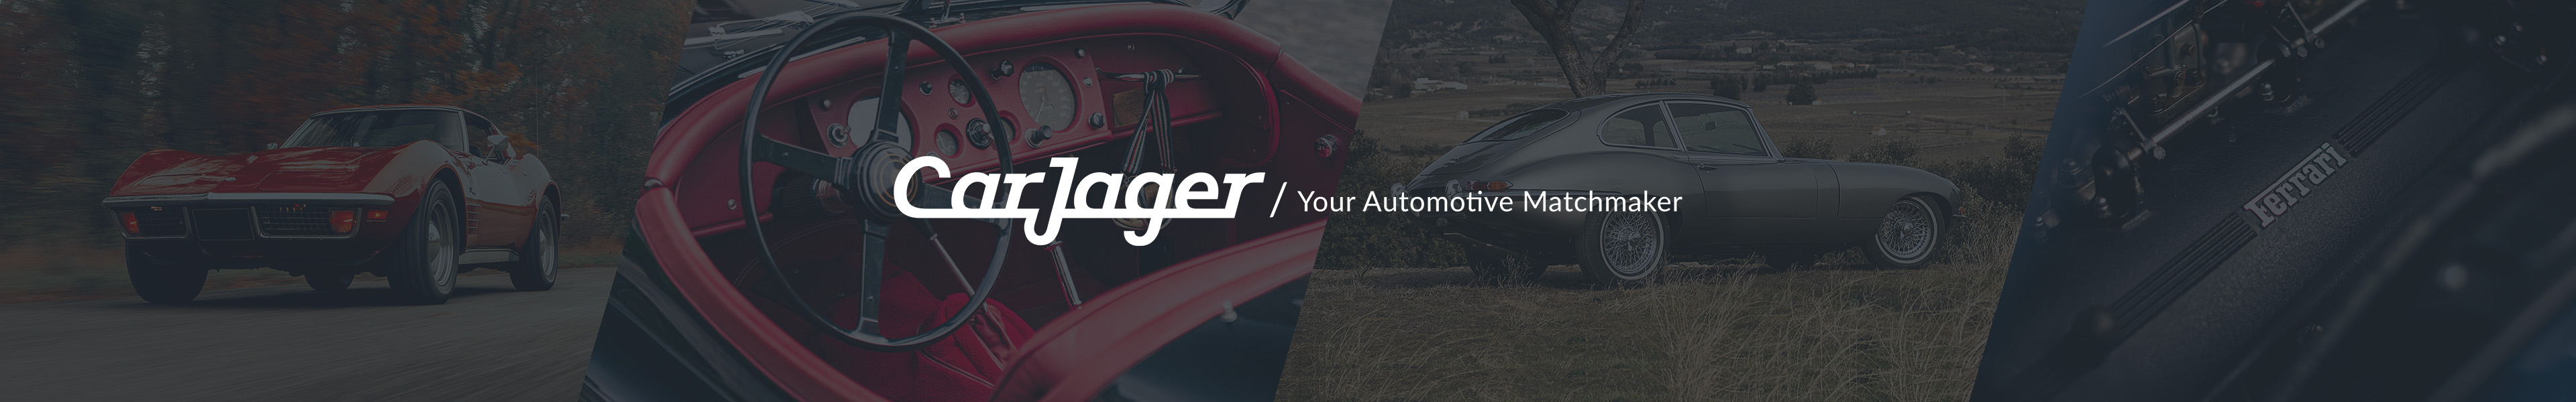 CarJager / Your Automotive Matchmaker